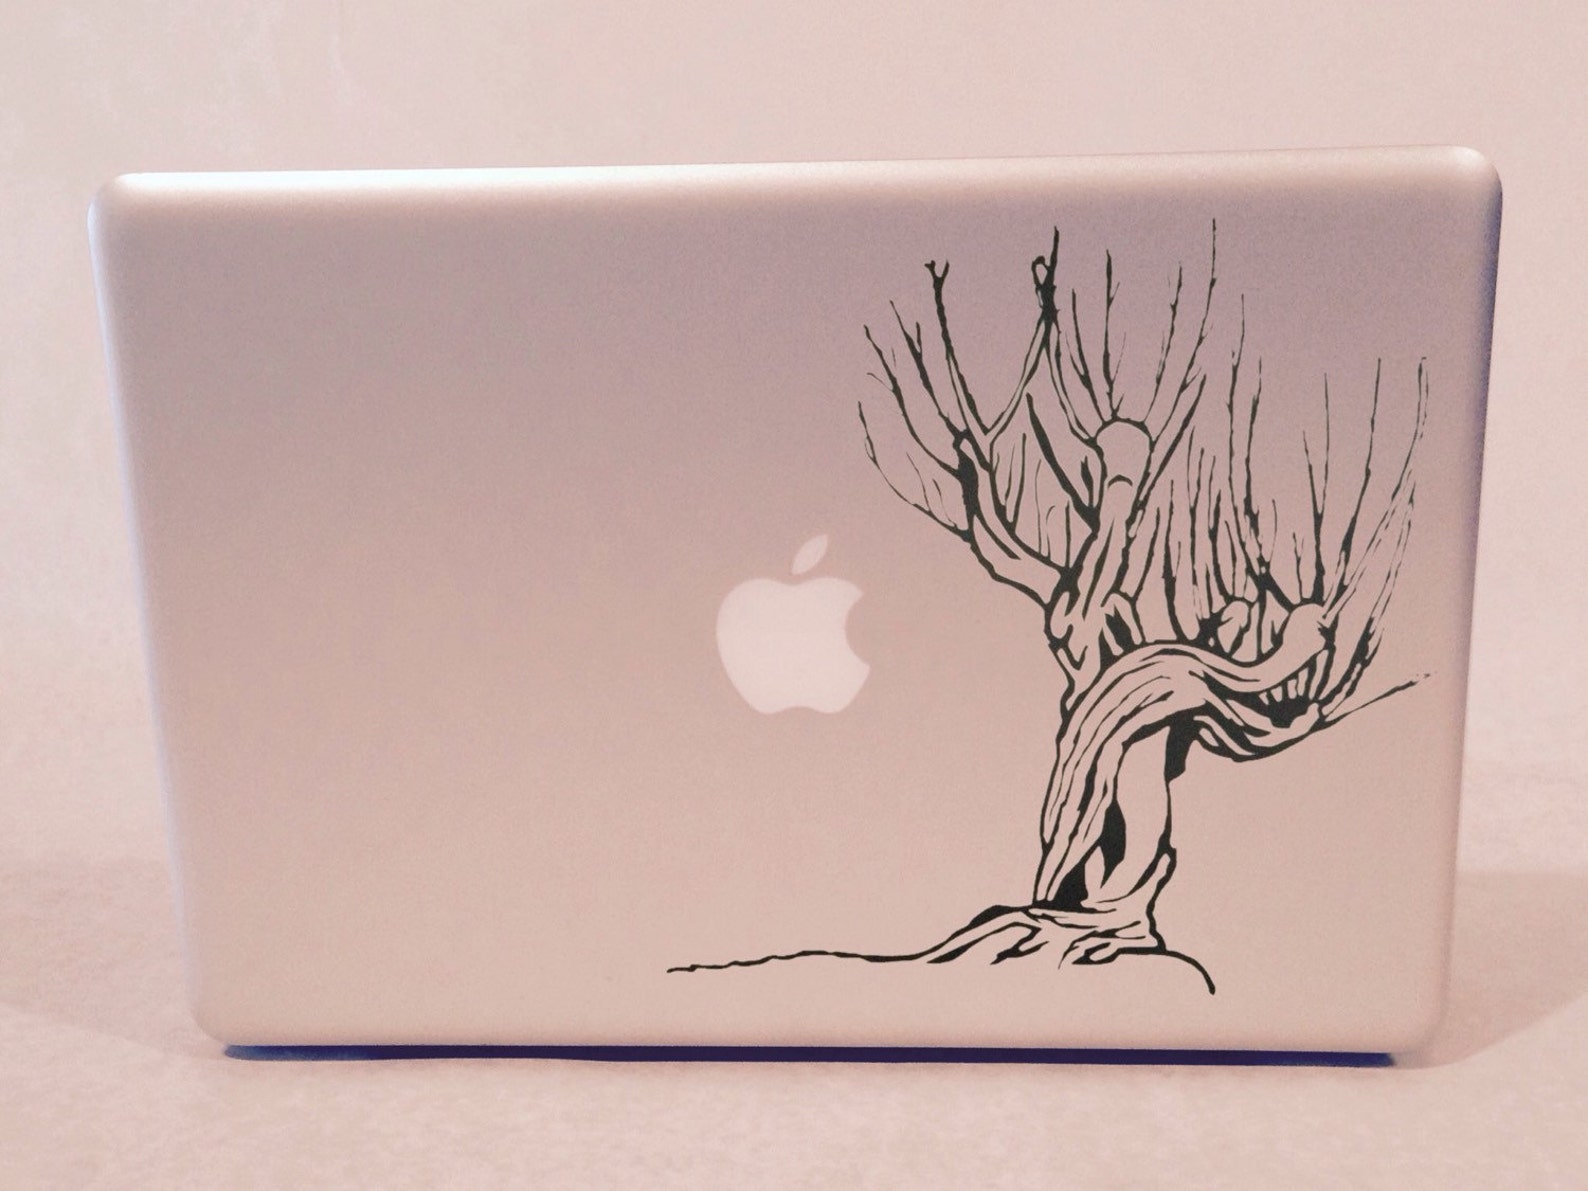 Whomping Willow Vinyl Decal image 0.